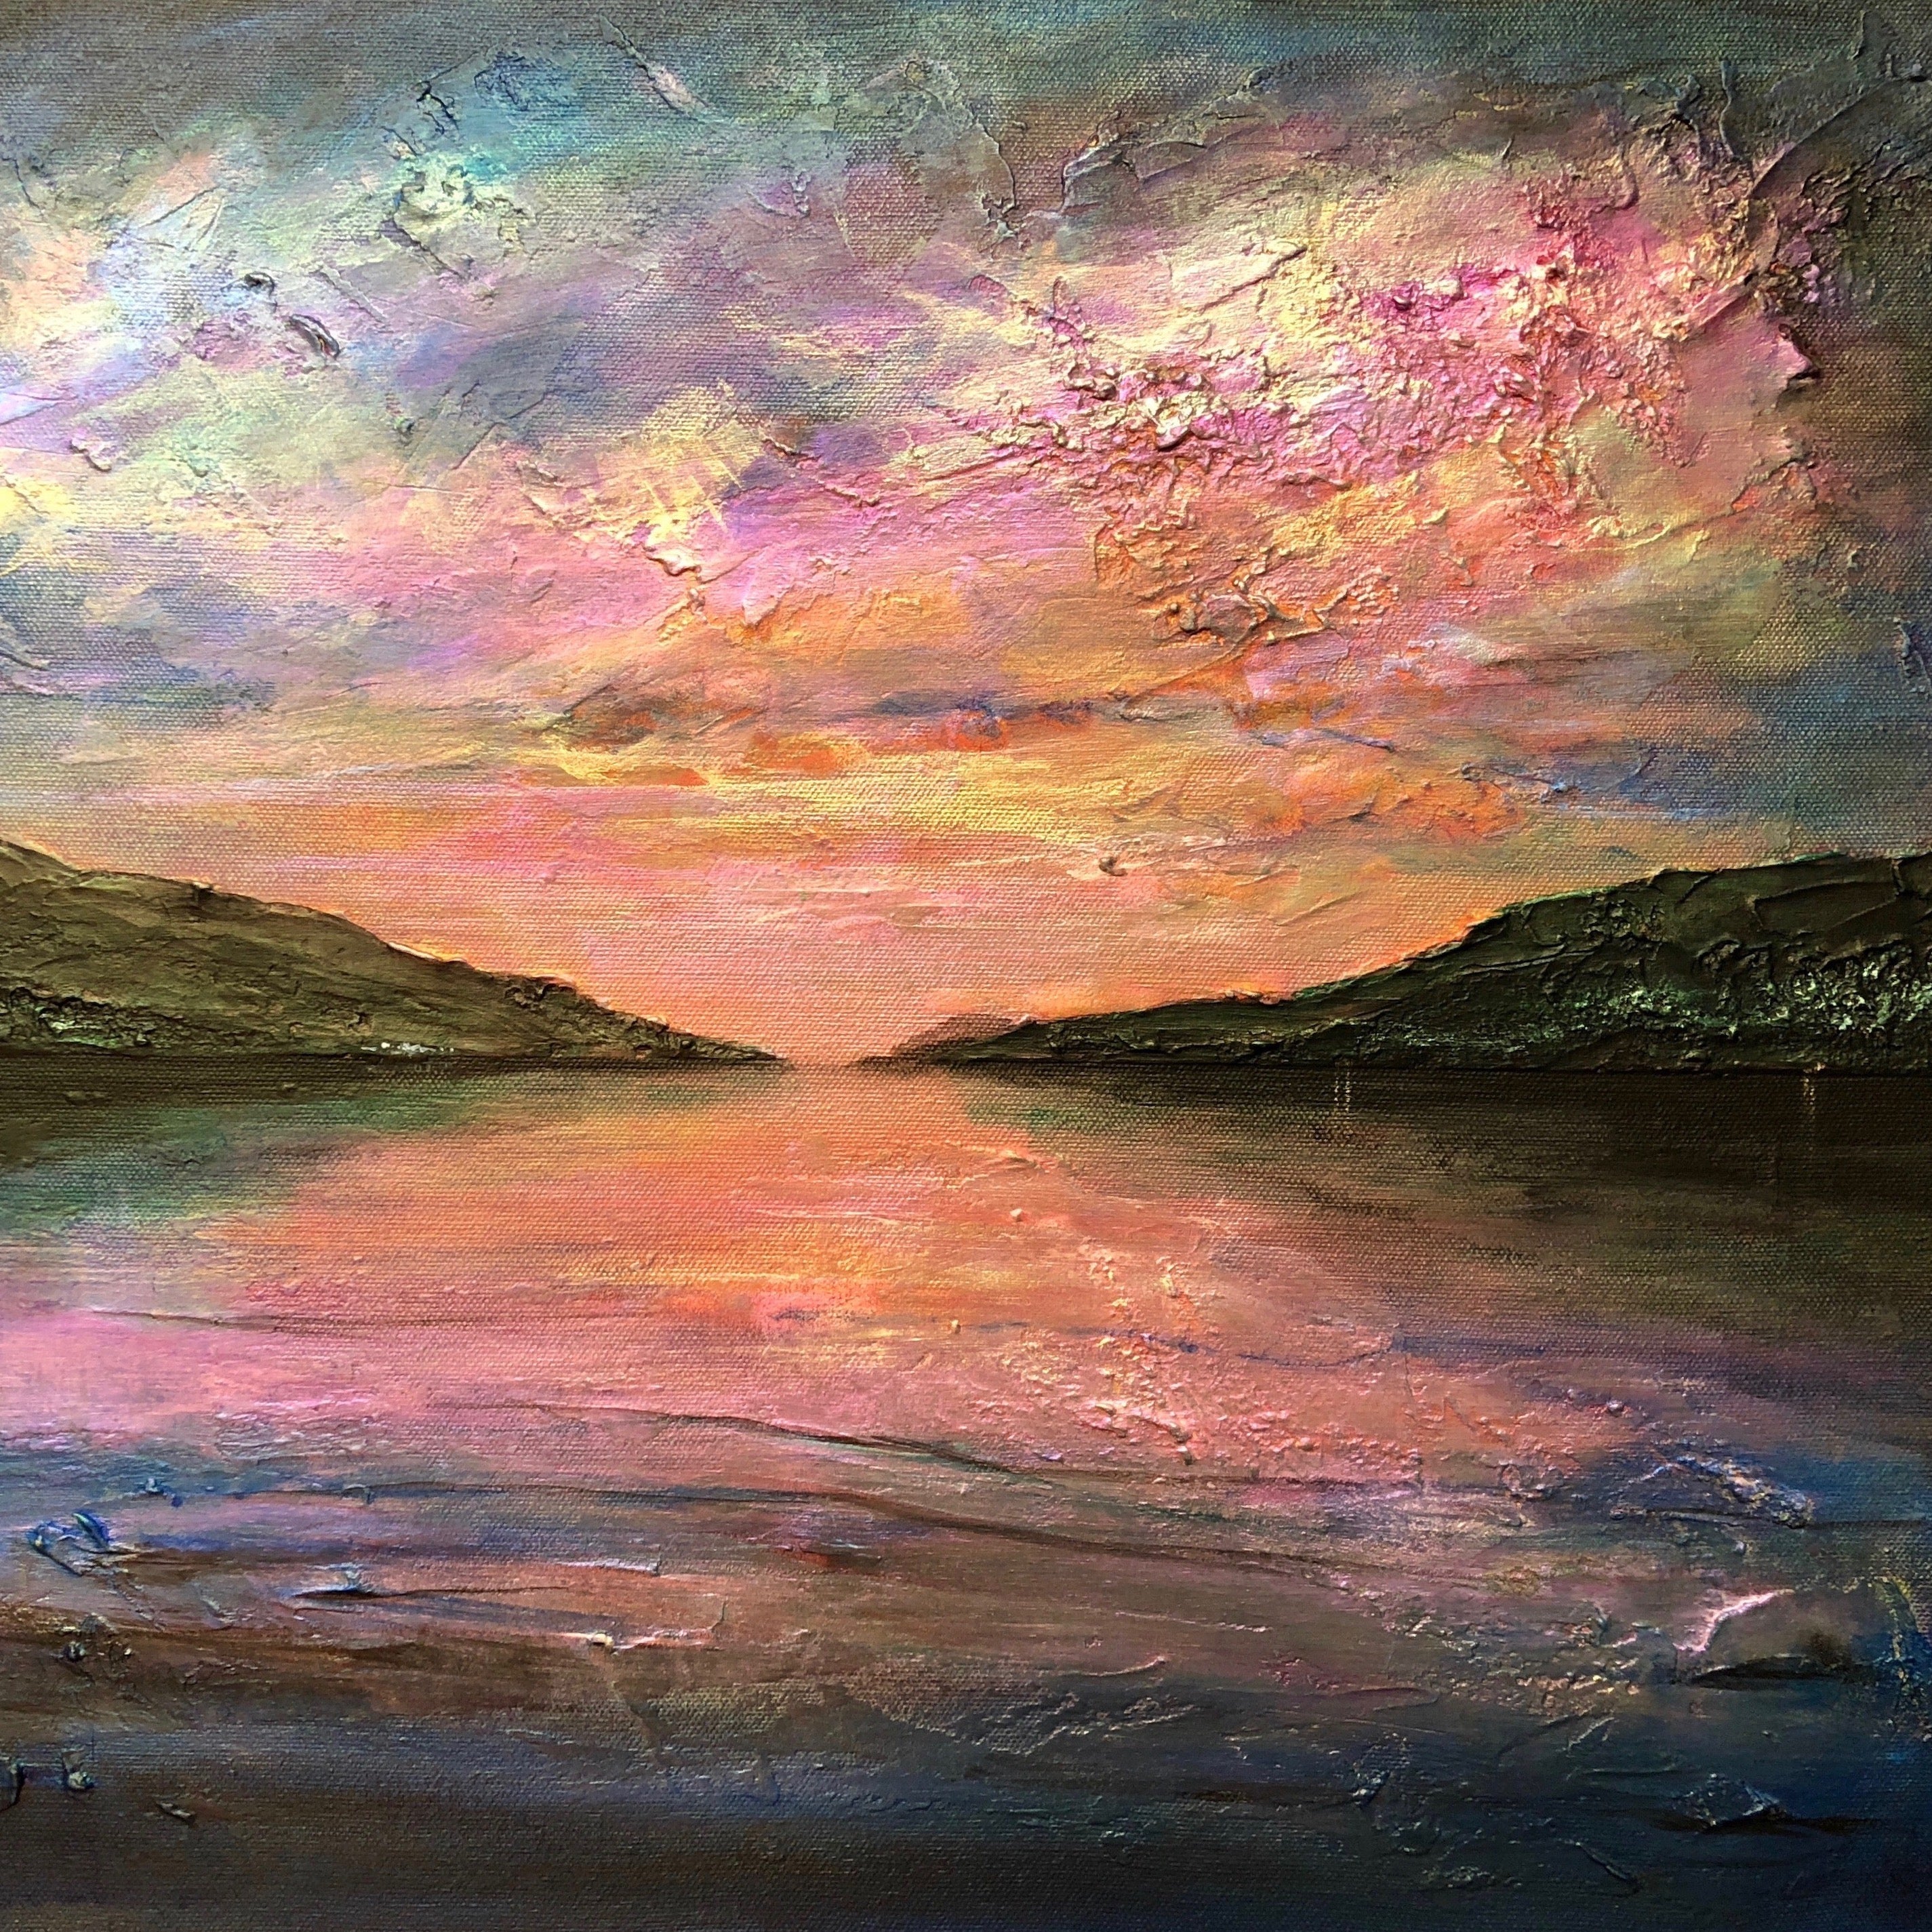 Loch Ness Dawn | Scotland In Your Pocket Framed Prints-Scotland In Your Pocket Framed Prints-Scottish Lochs & Mountains Art Gallery-Paintings, Prints, Homeware, Art Gifts From Scotland By Scottish Artist Kevin Hunter